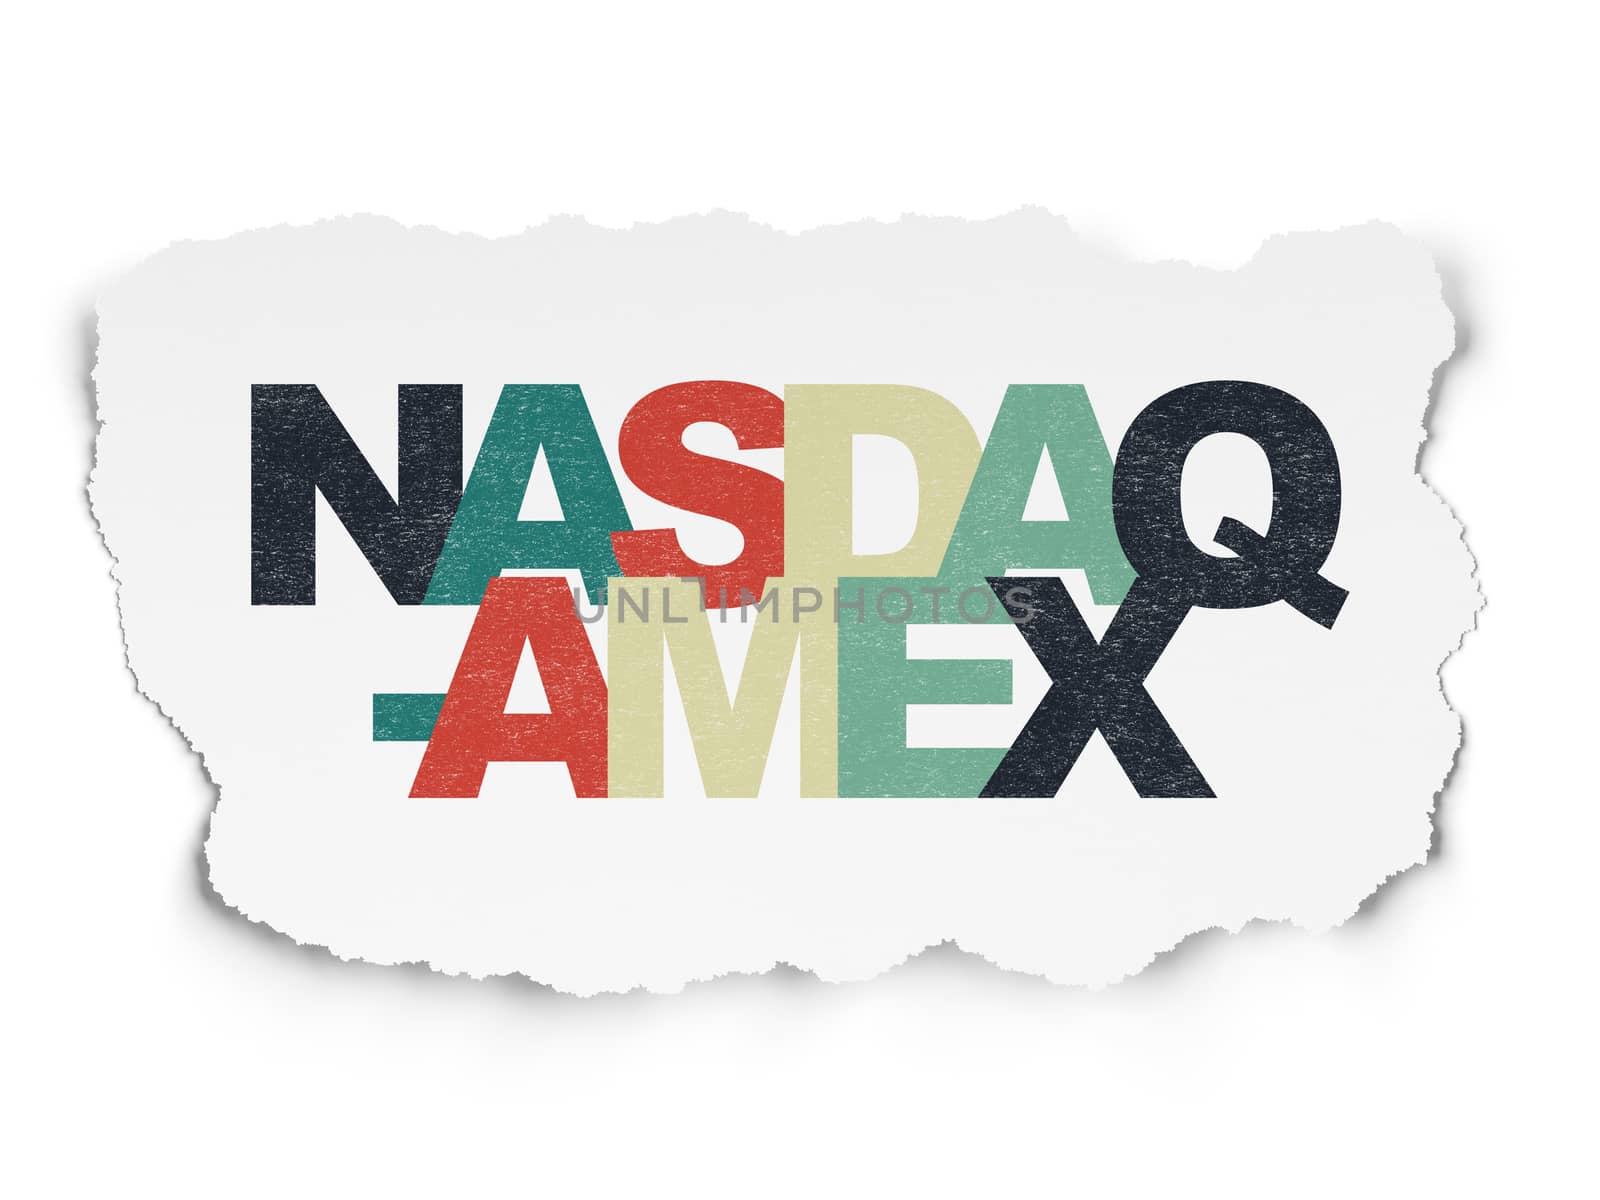 Stock market indexes concept: Painted multicolor text NASDAQ-AMEX on Torn Paper background